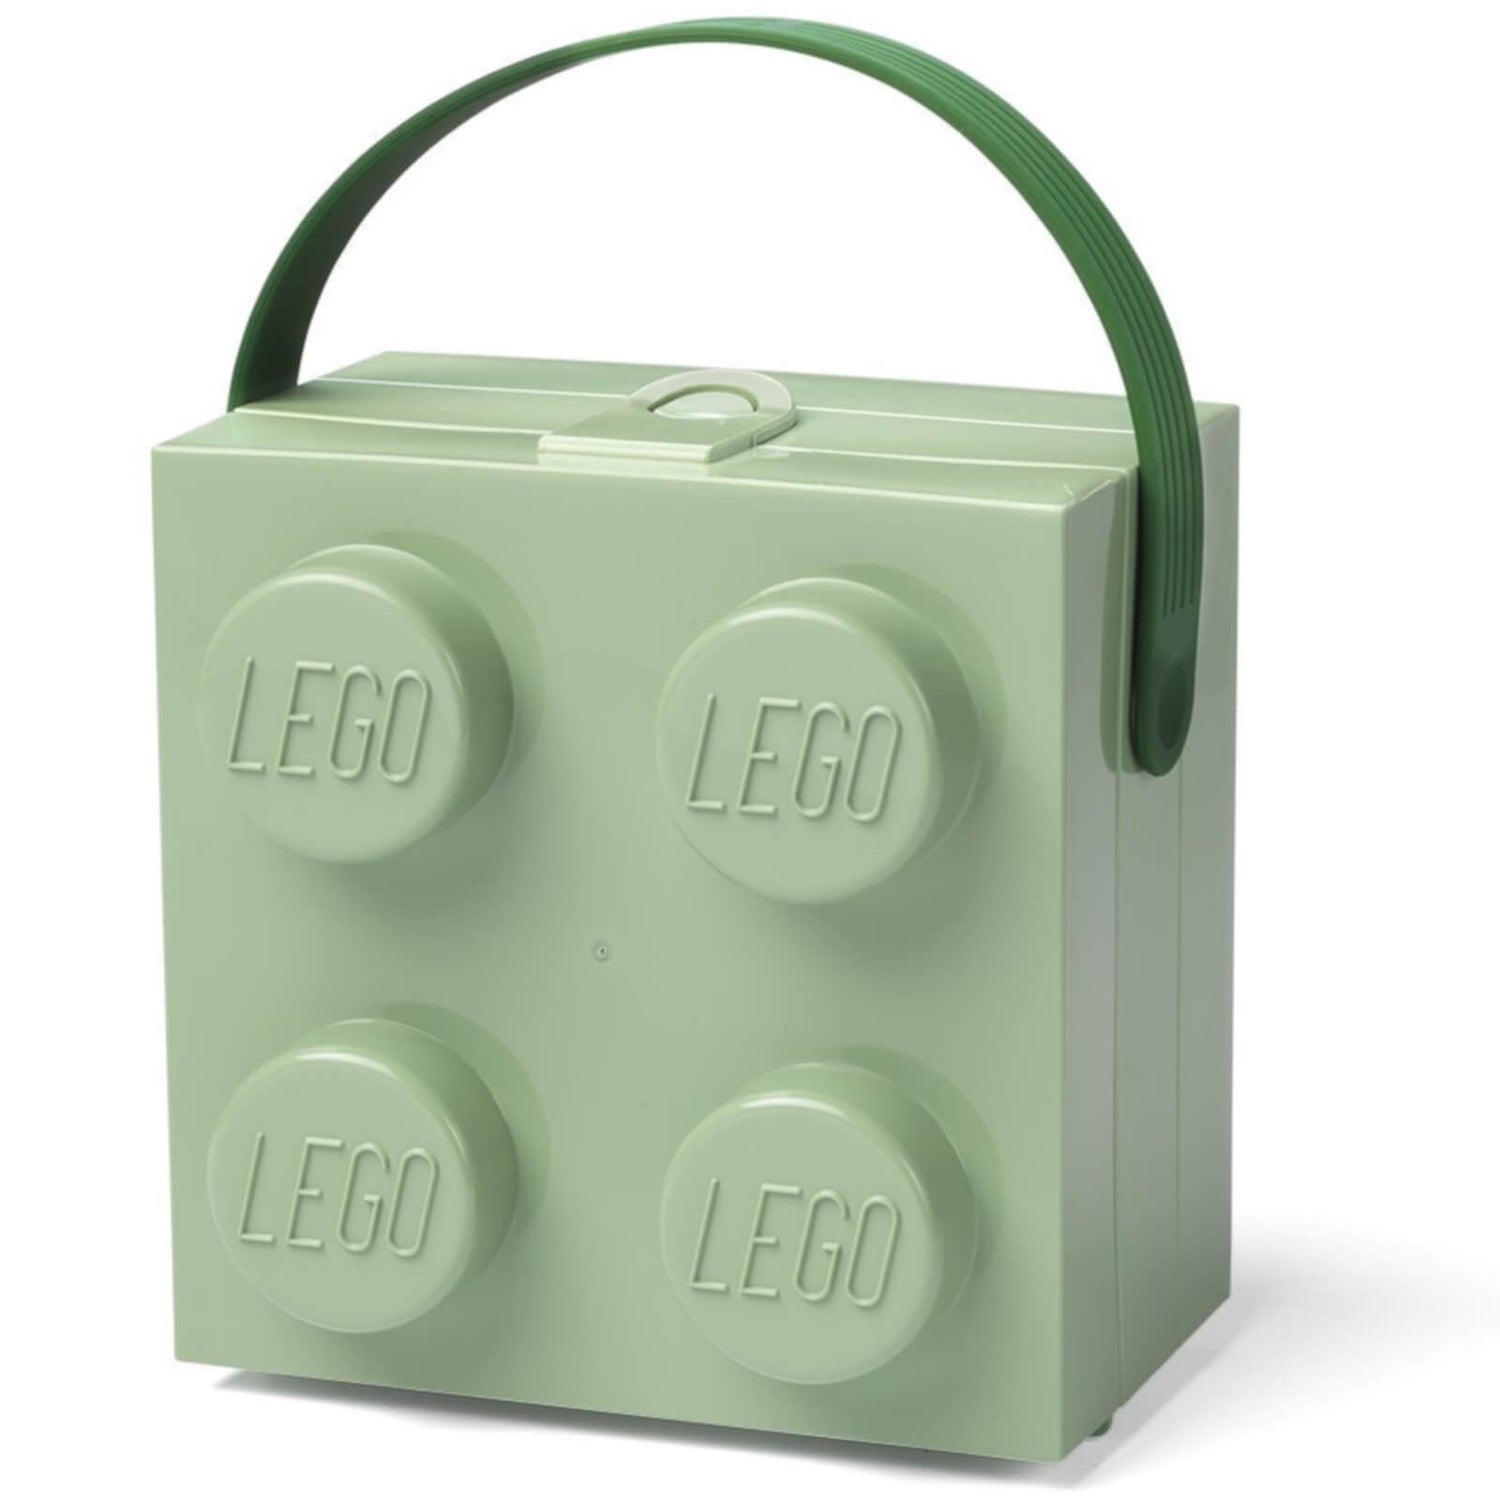 LEGO Lunch Box with Handle - Sand Green